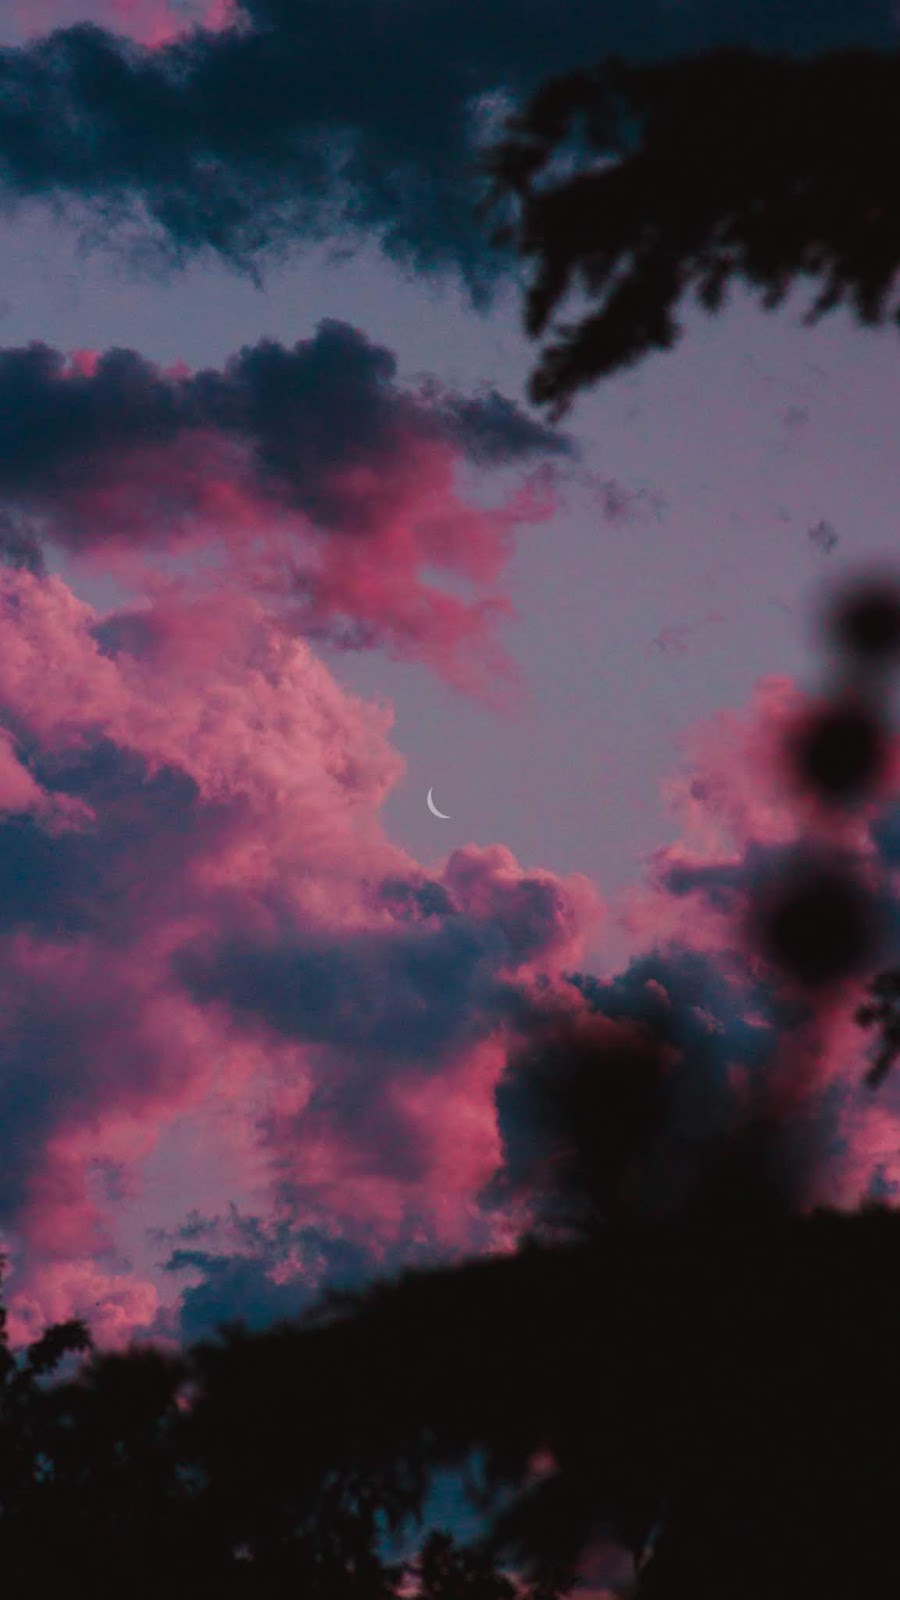 Crescent moon in the pink sky